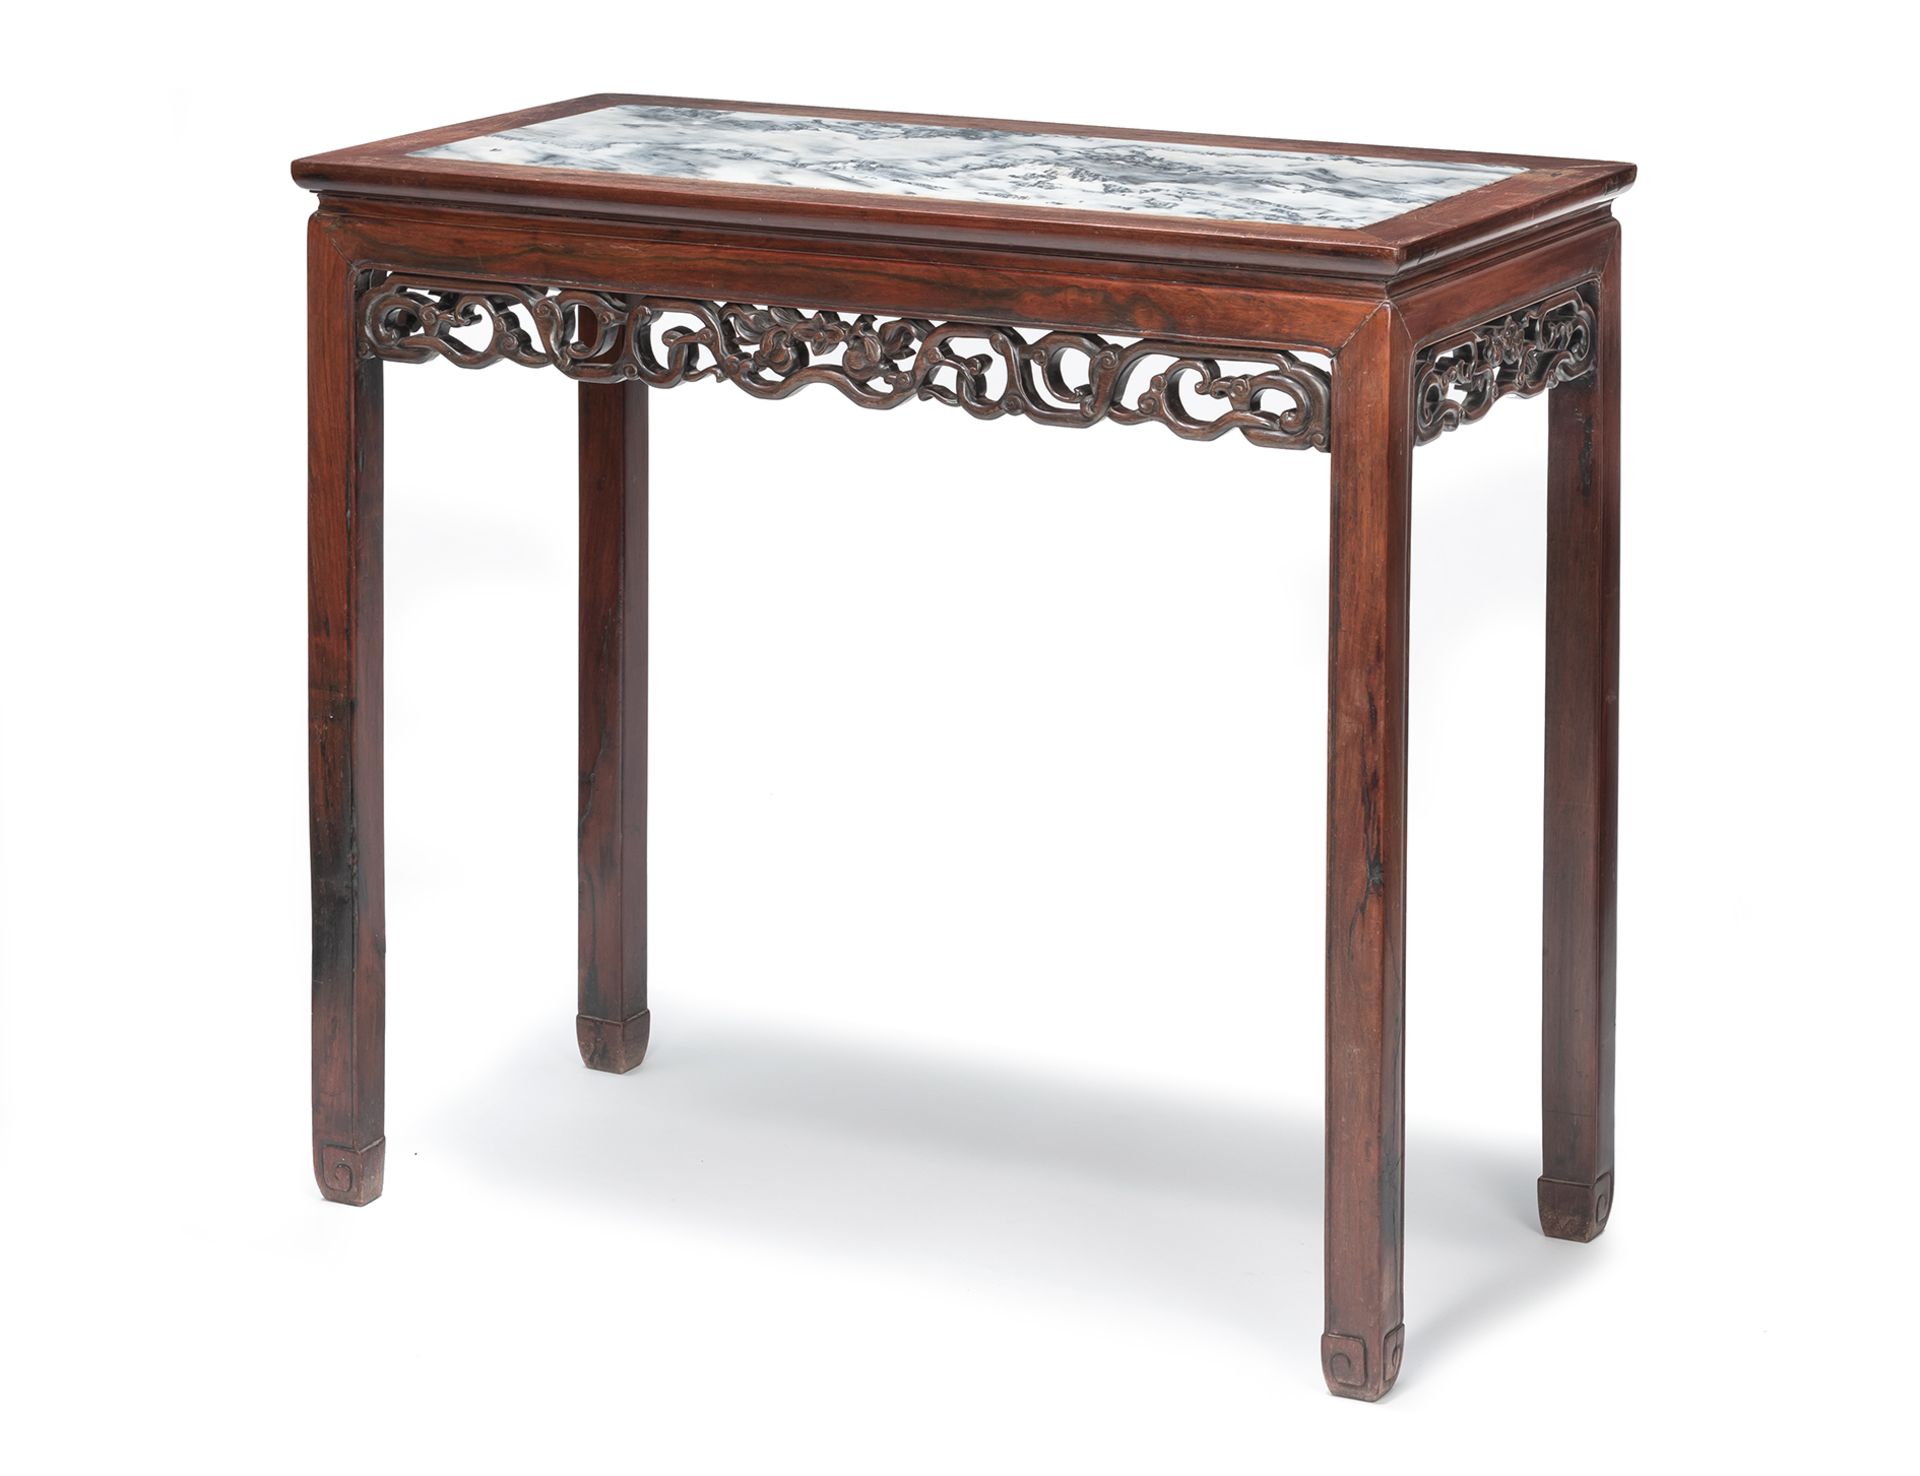 A MARBLE-INSET OPENWORK FLORAL SCROLL APRON CORNER-LEG TABLE